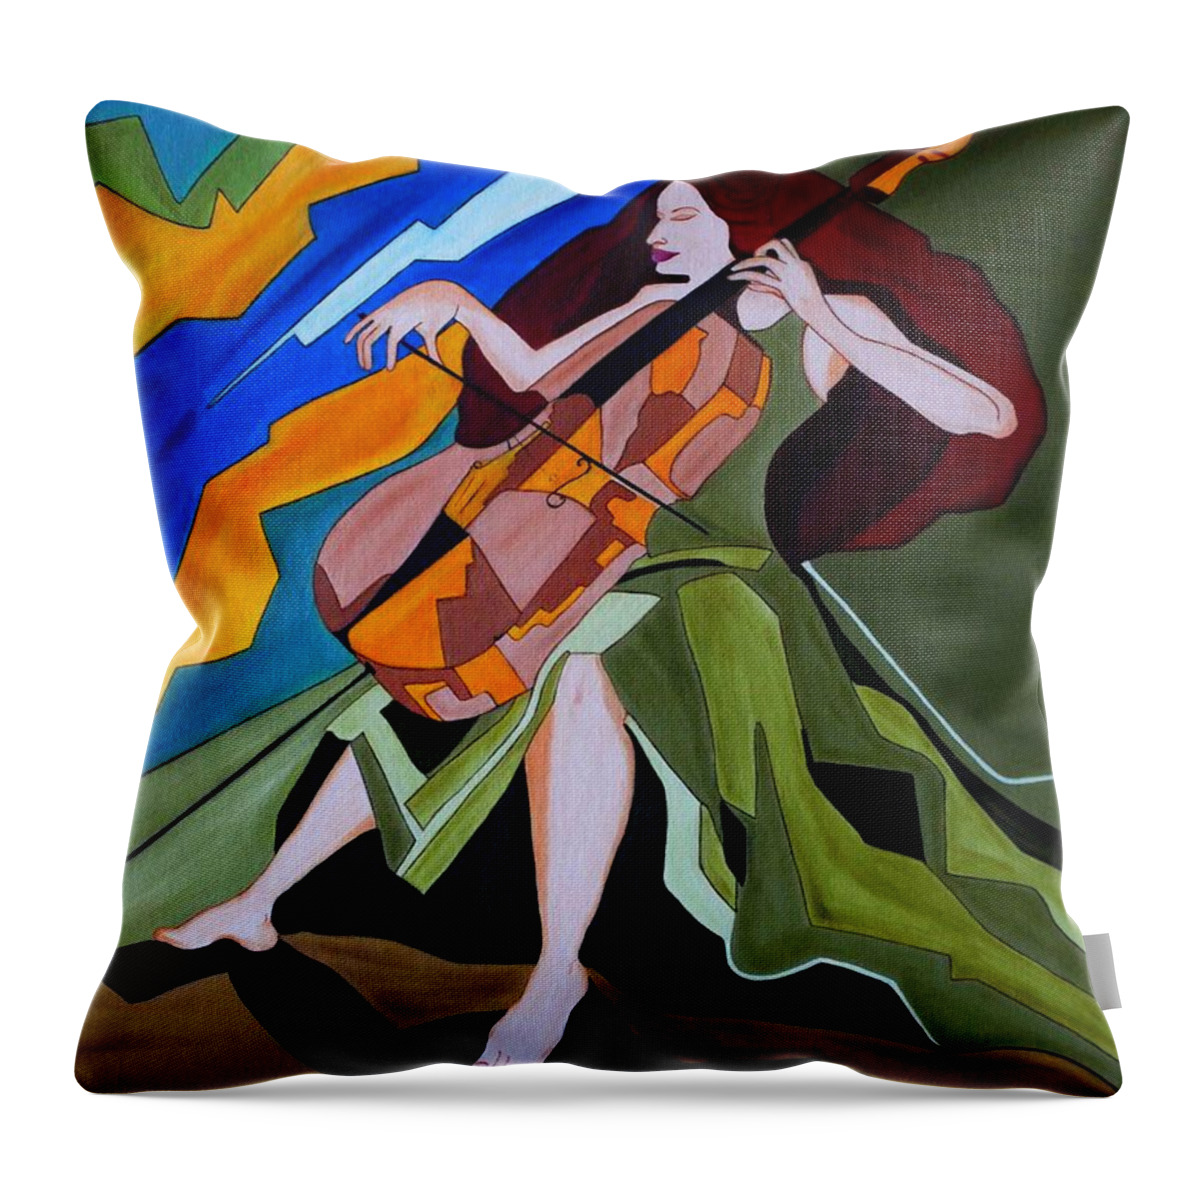 Oil Throw Pillow featuring the painting Lost in Music by Sonali Kukreja